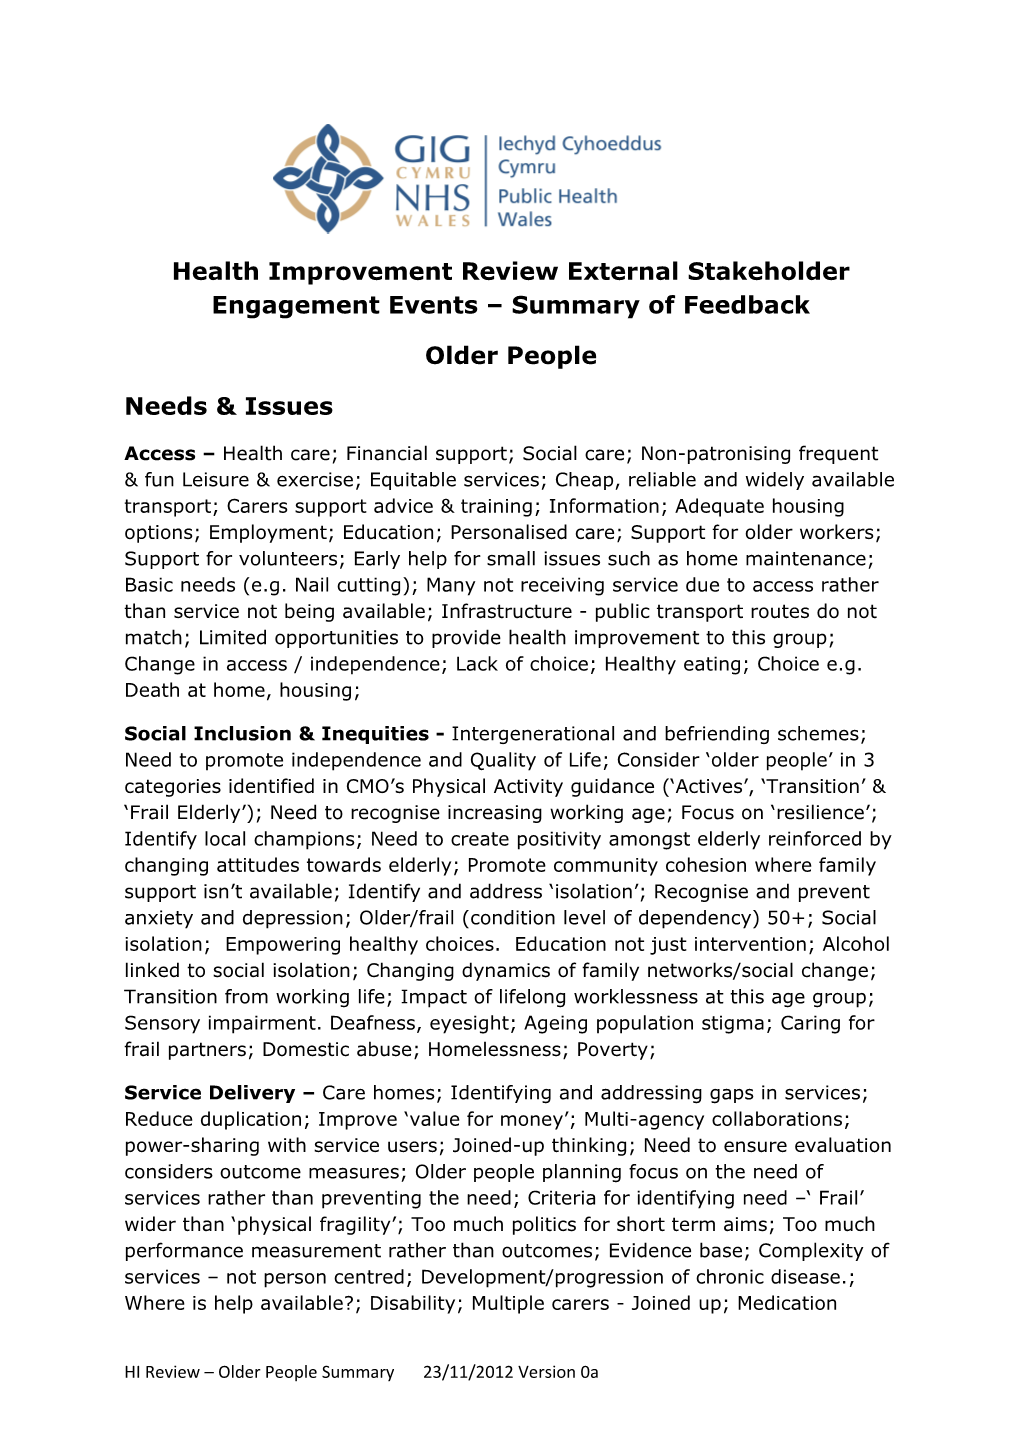 Health Improvement Review External Stakeholder Engagement Events Summary of Feedback